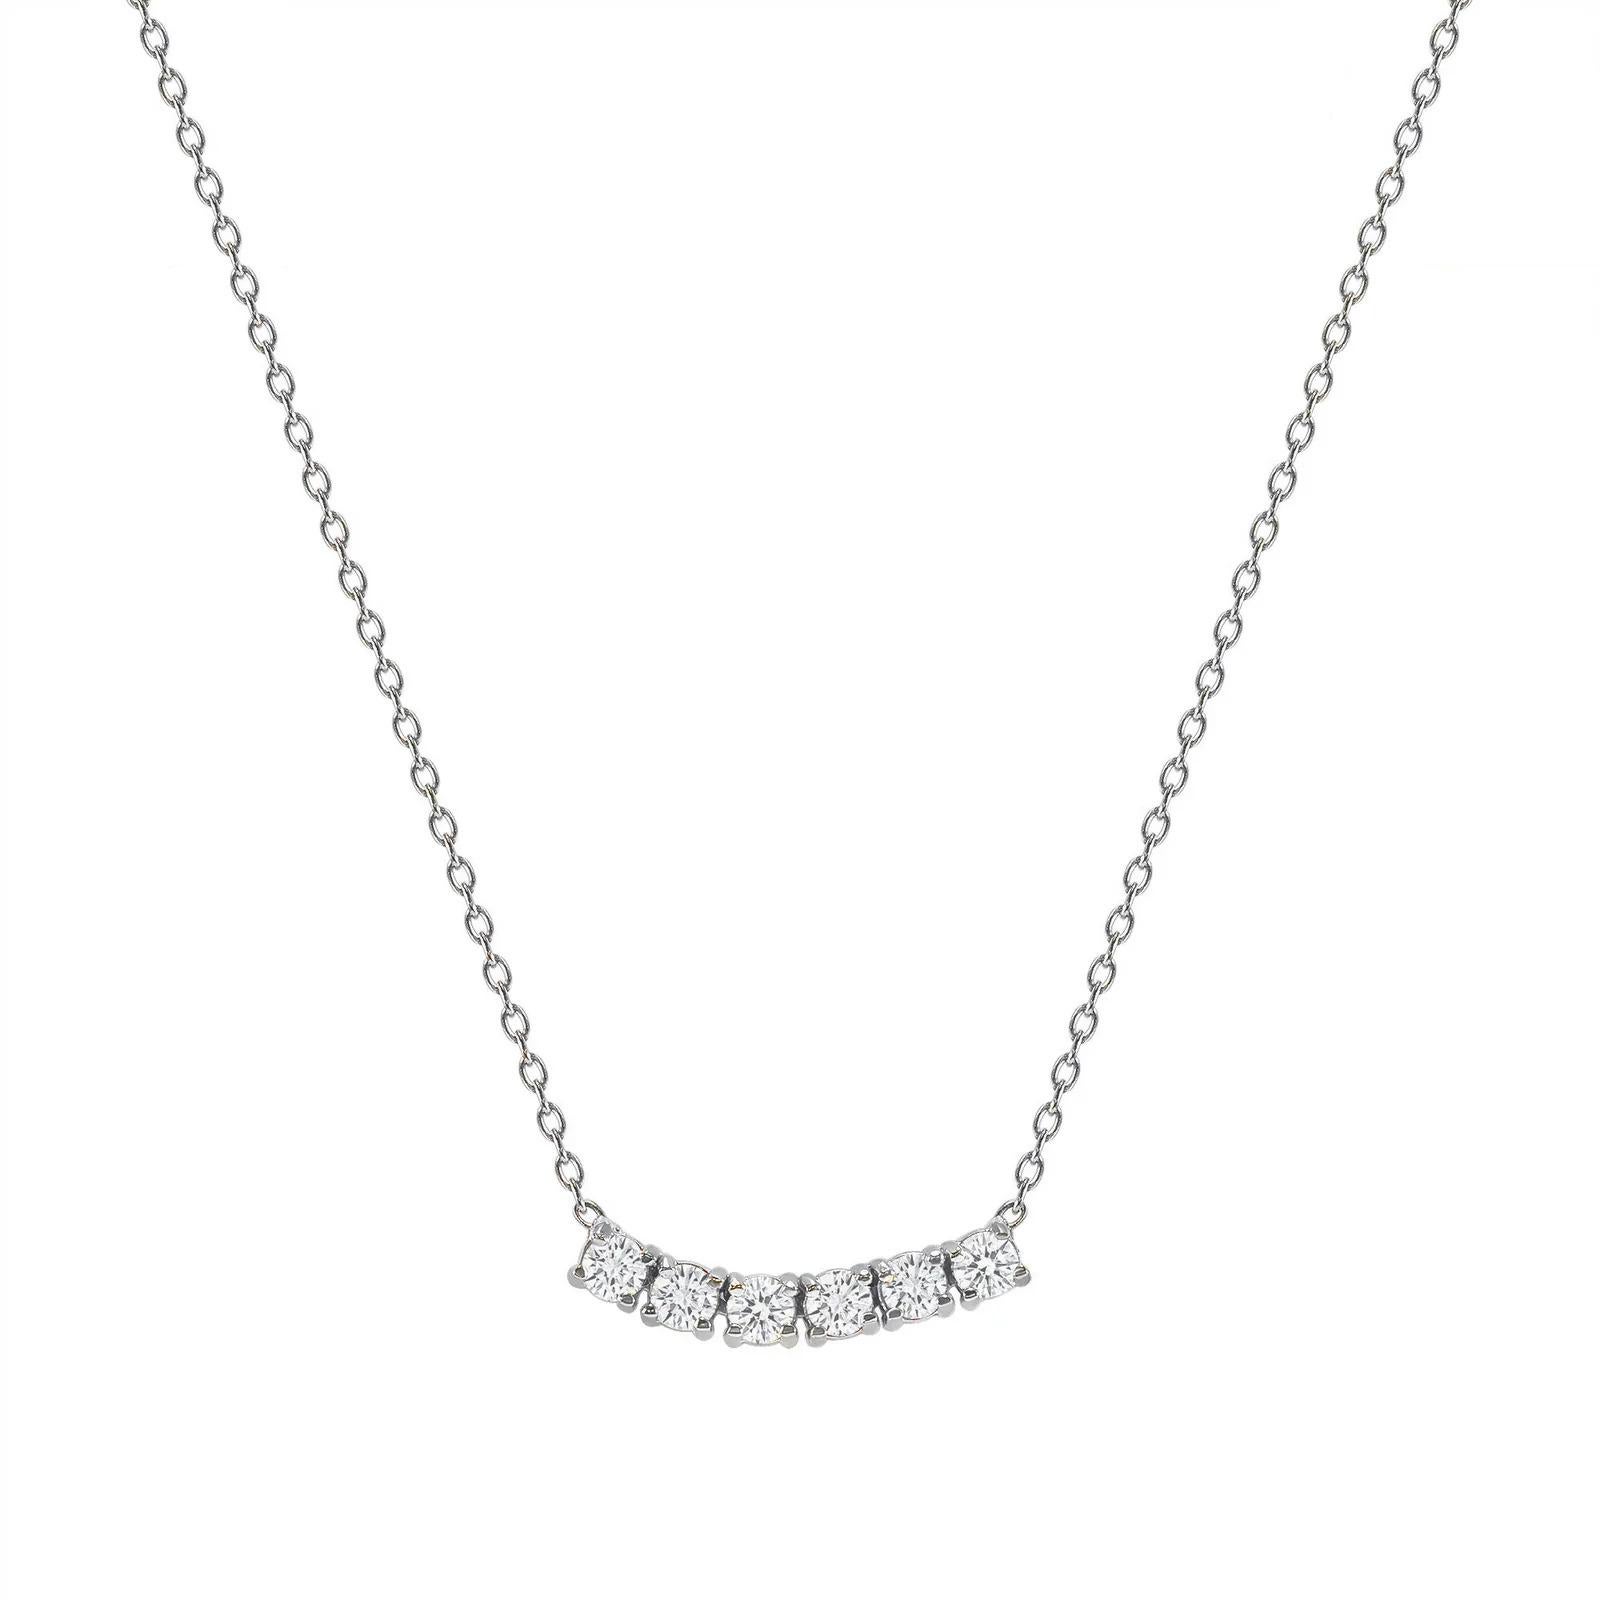 This petite, curved diamond necklace is crafted with gorgeous 14k gold set with six round diamonds.  

Gold: 14k 
Diamond Total Carats: 1.5 ct
Diamond Cut: Round (6 diamonds)
Diamond Clarity: VS
Diamond Color: F
Color: White Gold
Necklace Length: 22